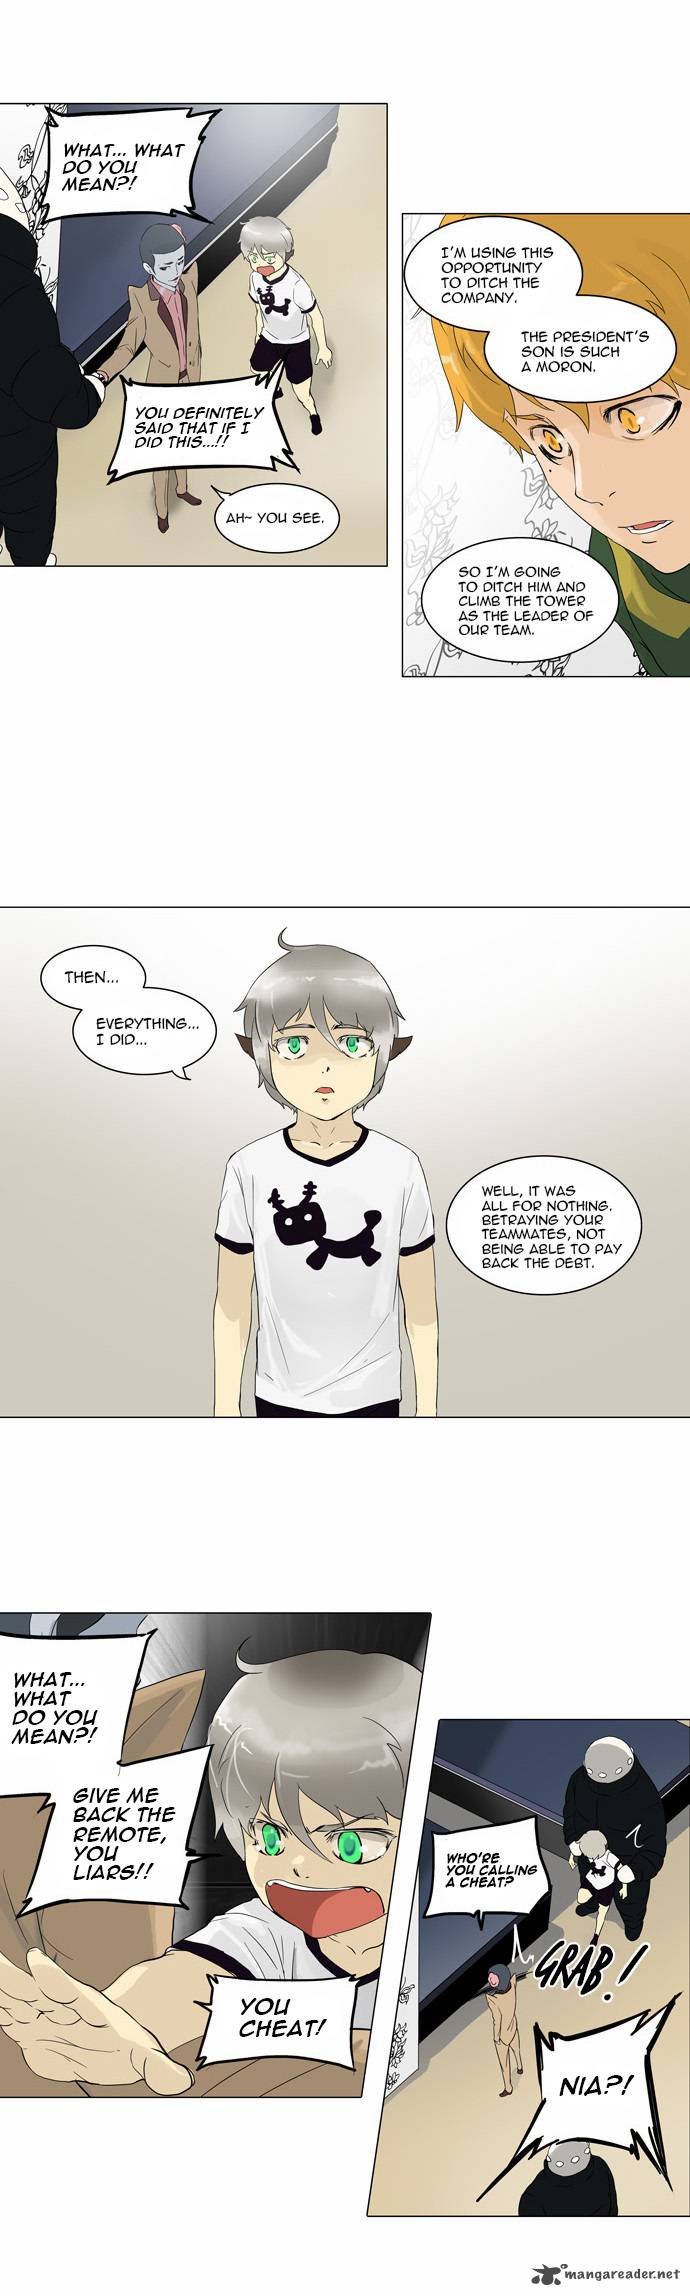 Tower Of God 98 29